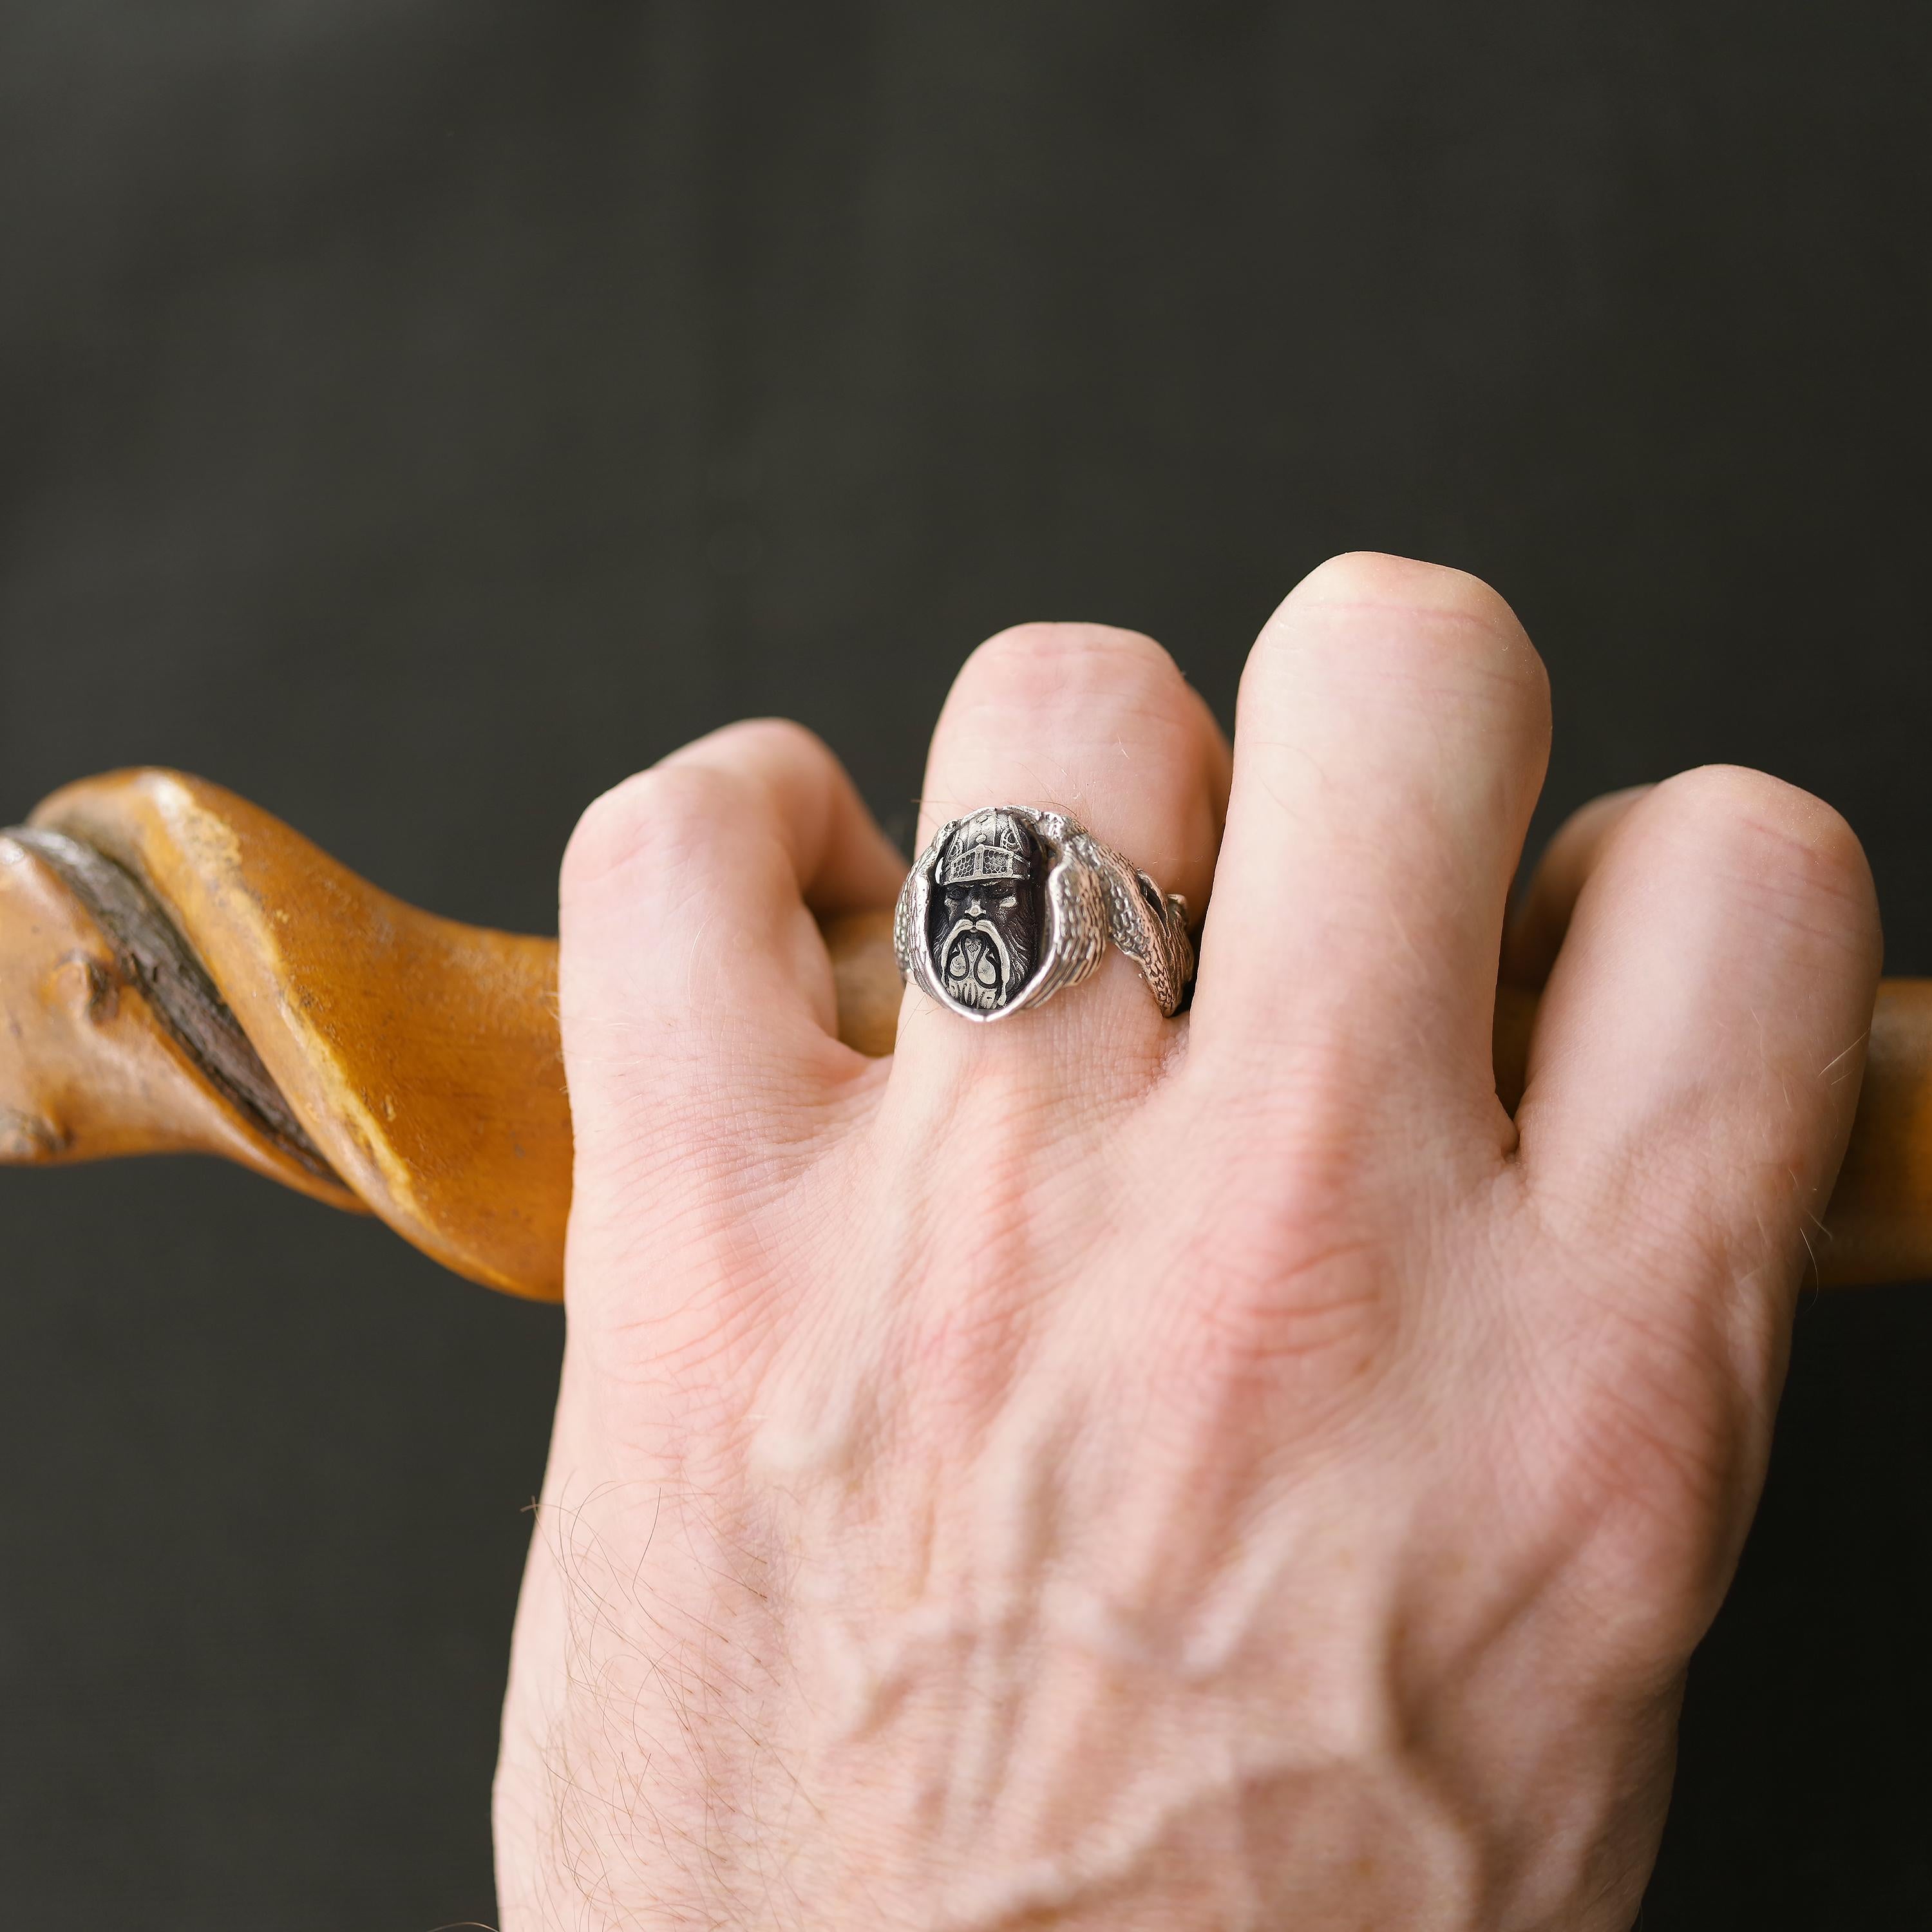 Figural Ring Depicting Odin the Norse God circa 1930 is Beyond Rare 2